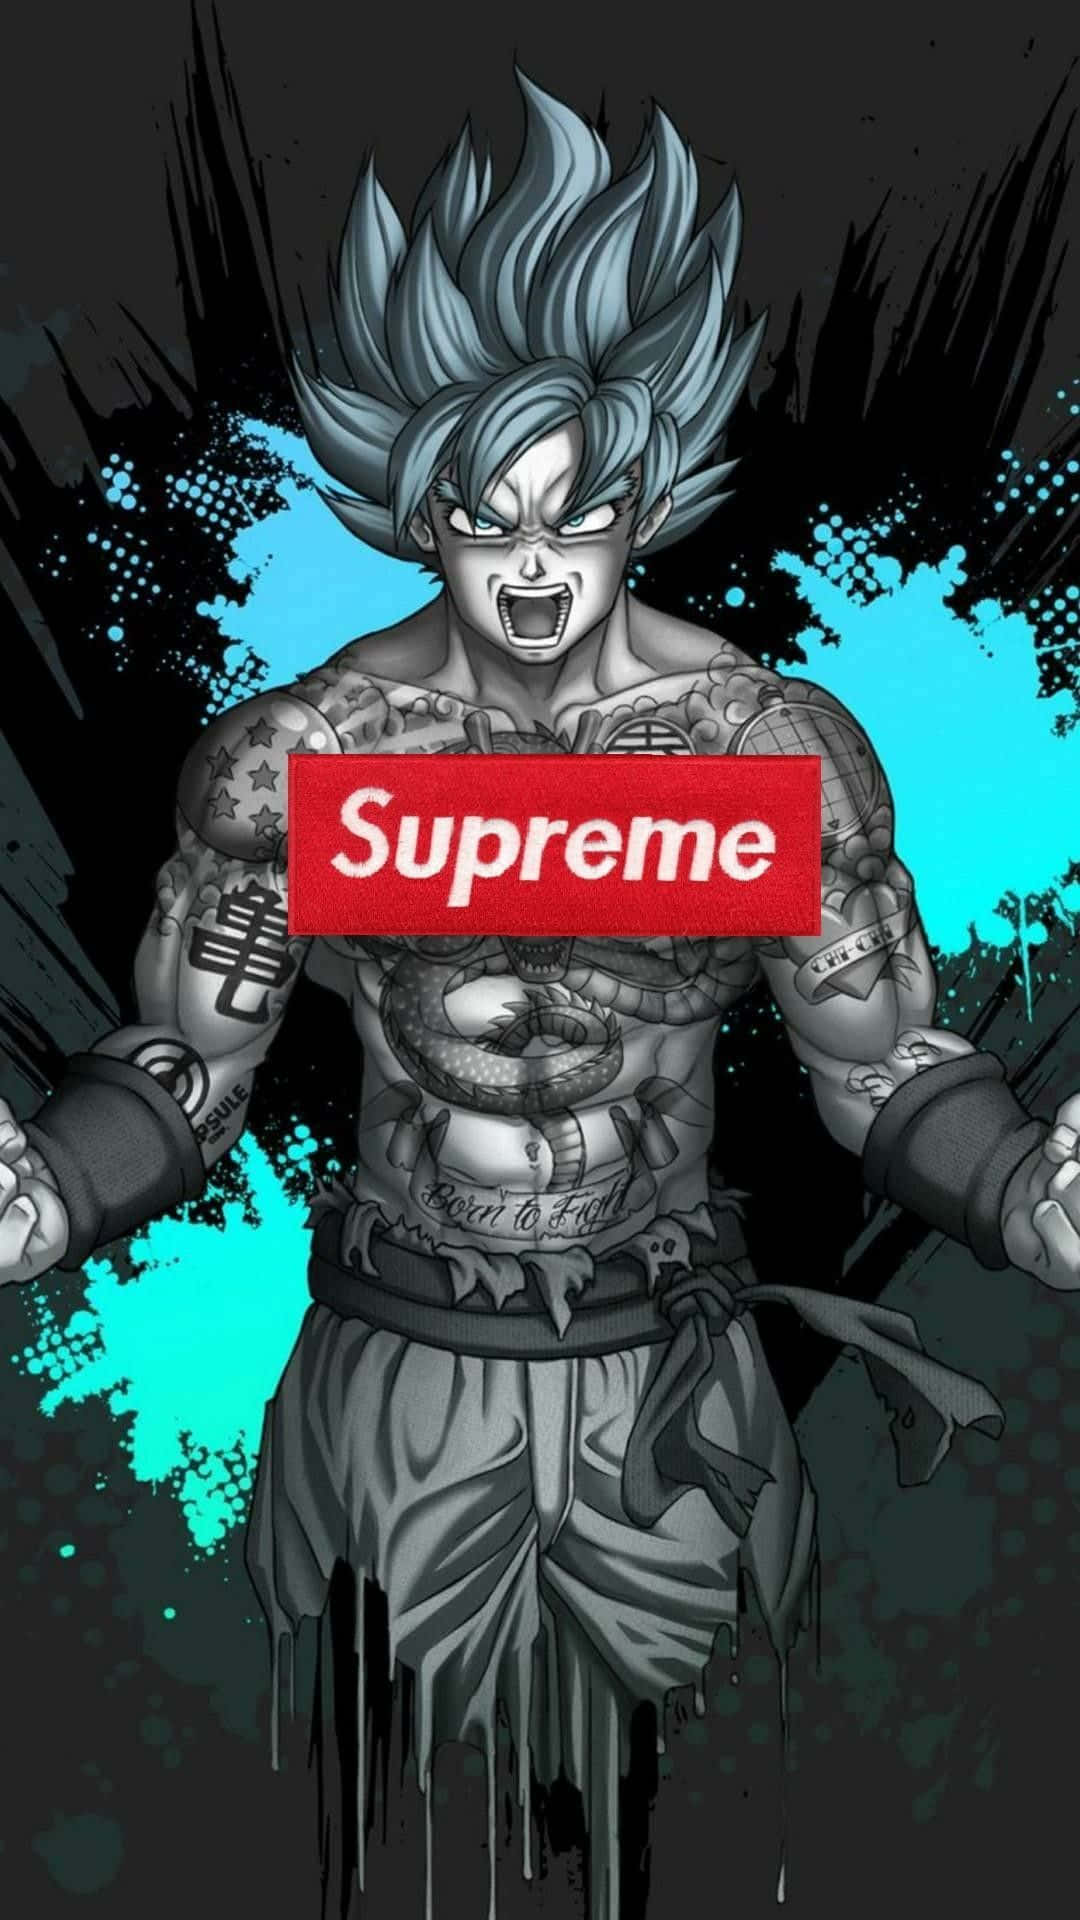 Get ready to fly with Goku Supreme! Wallpaper